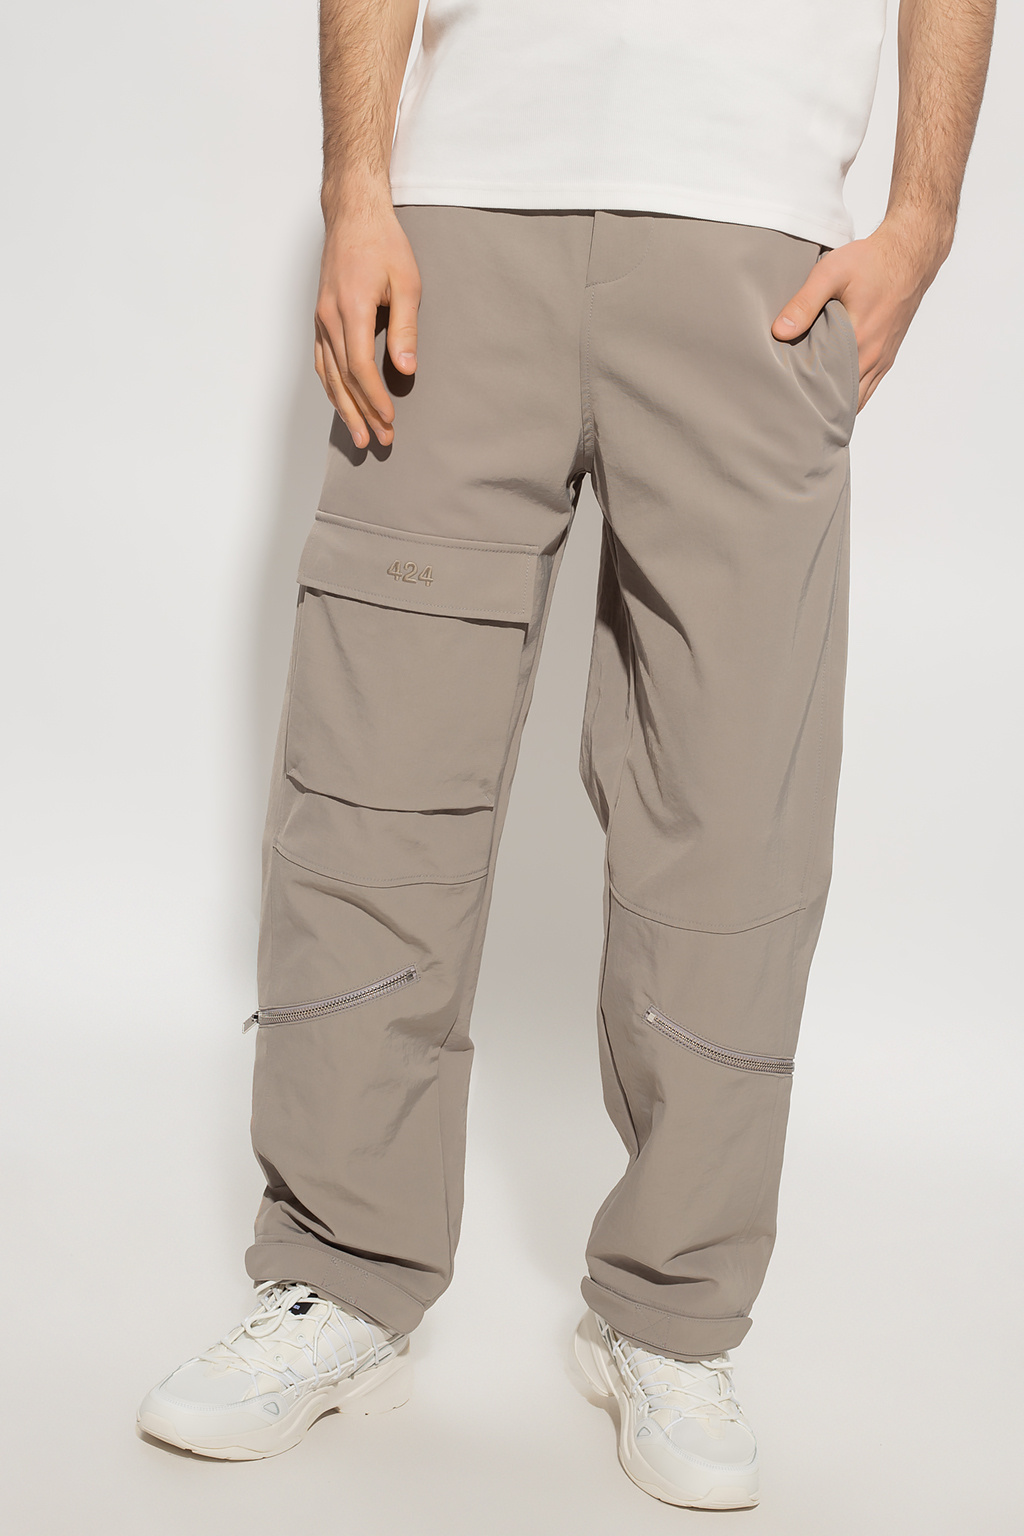 424 Trousers with lace pockets